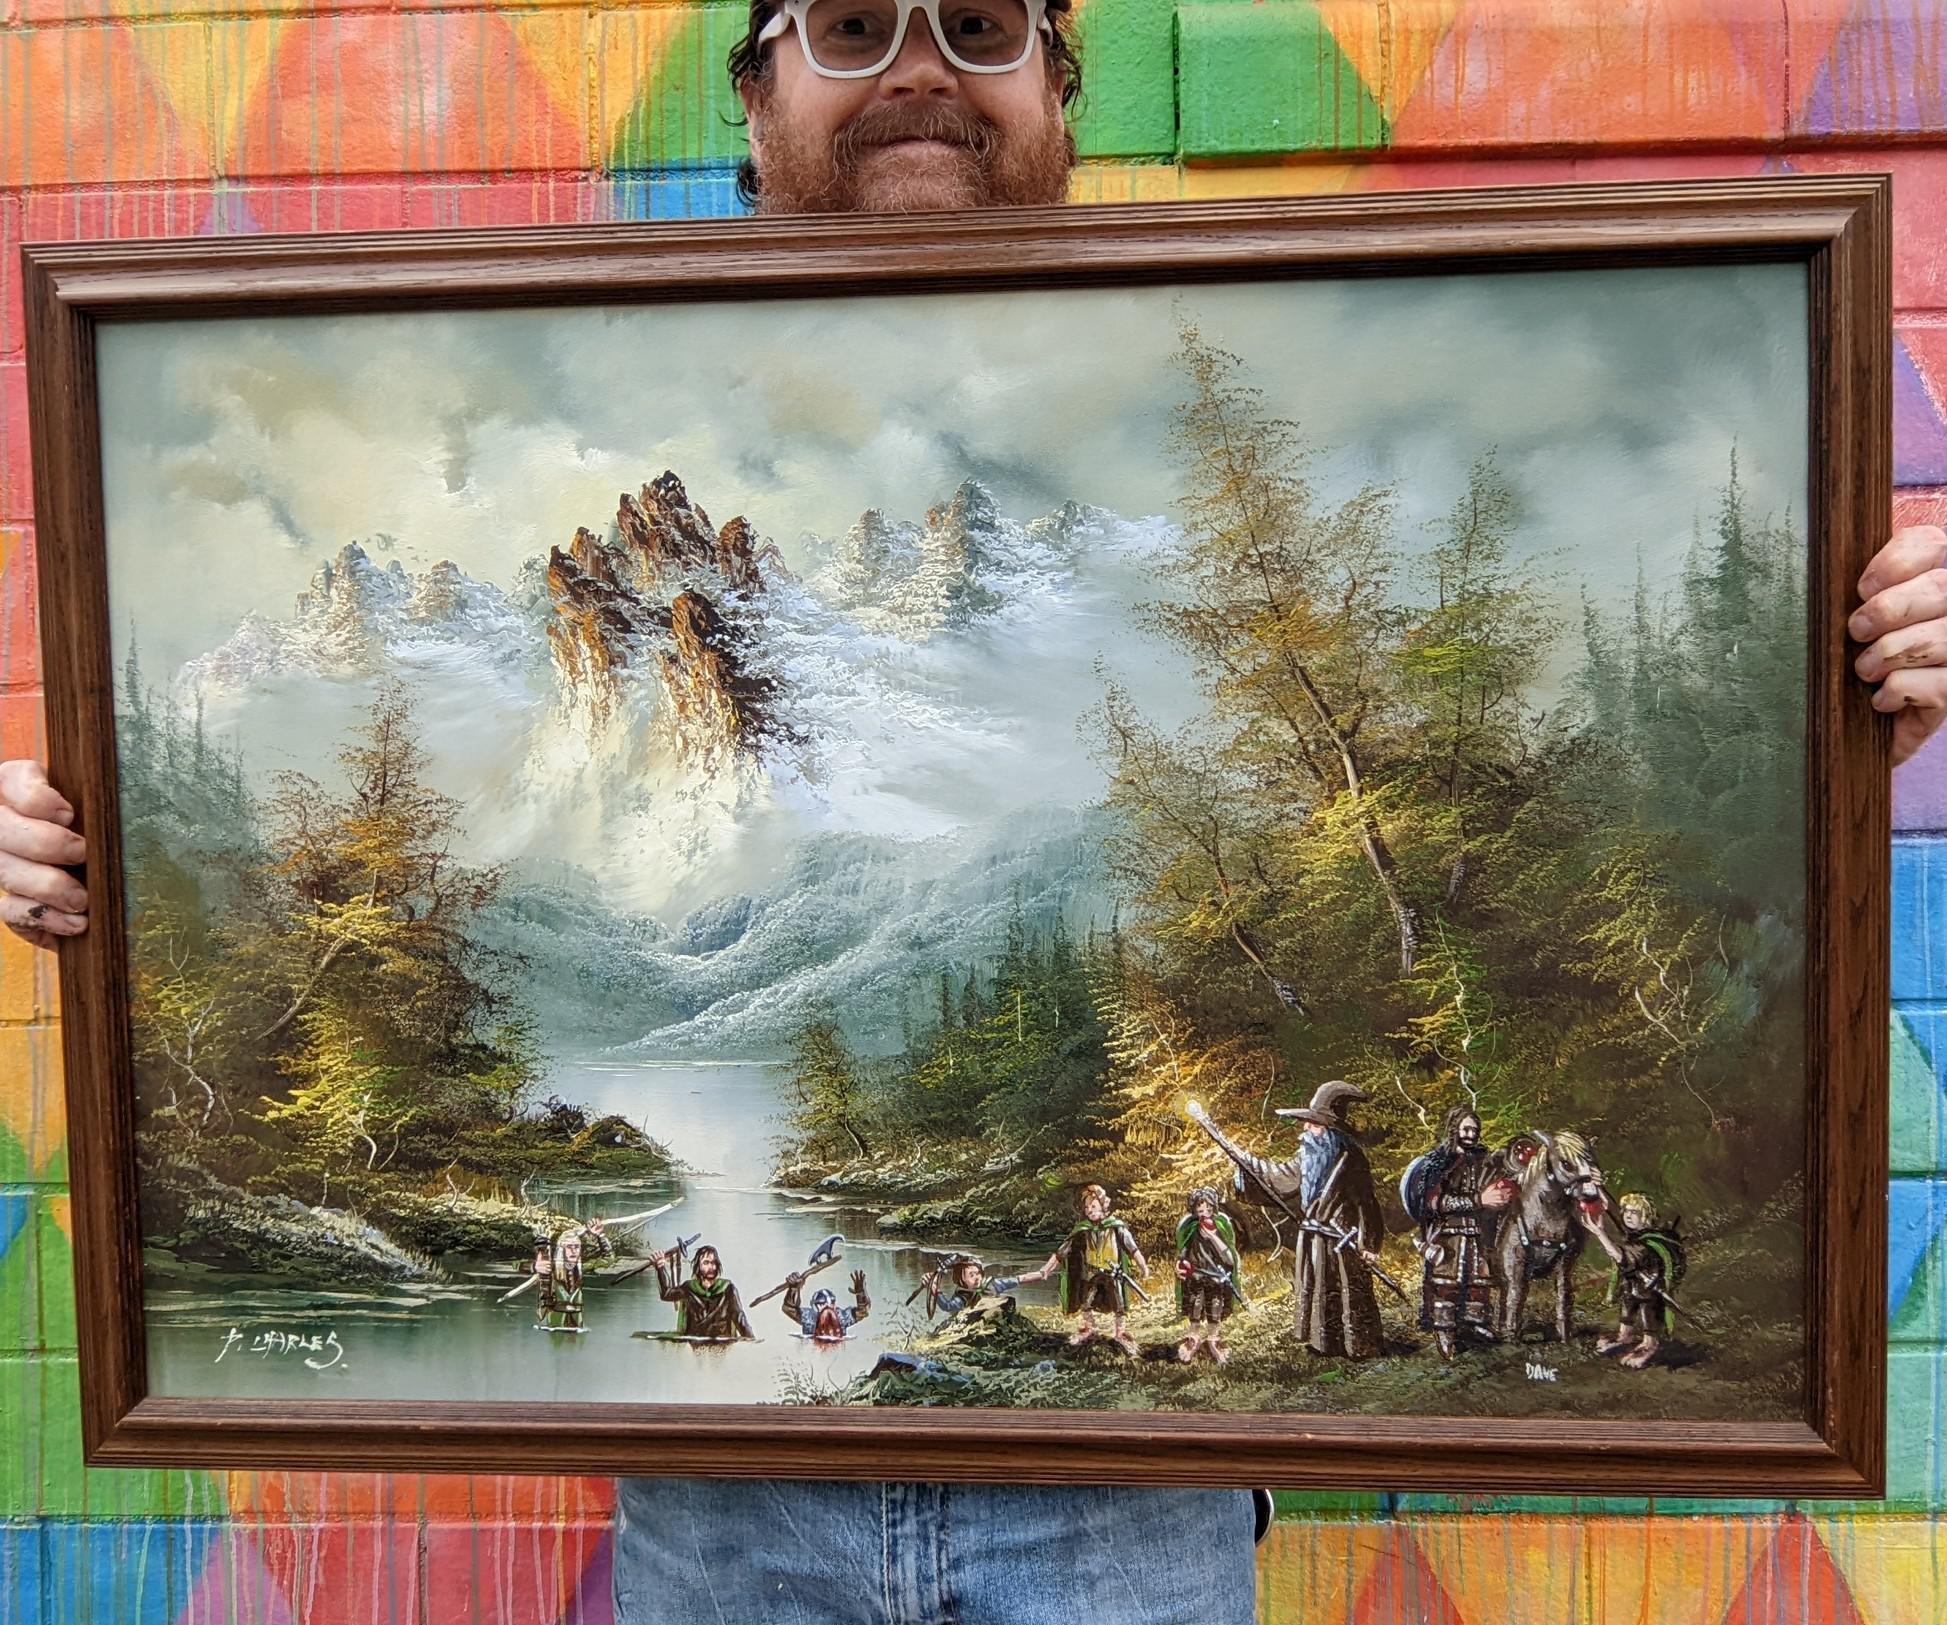 a man with a beard and glasses smiling as he holds a large painting in front of him that covers up most of him. the painting has lots of trees, a river, and a large, snowy mountain in the distance. "lord of the ring" characters have been added and are making their way across the river in a   single file line.